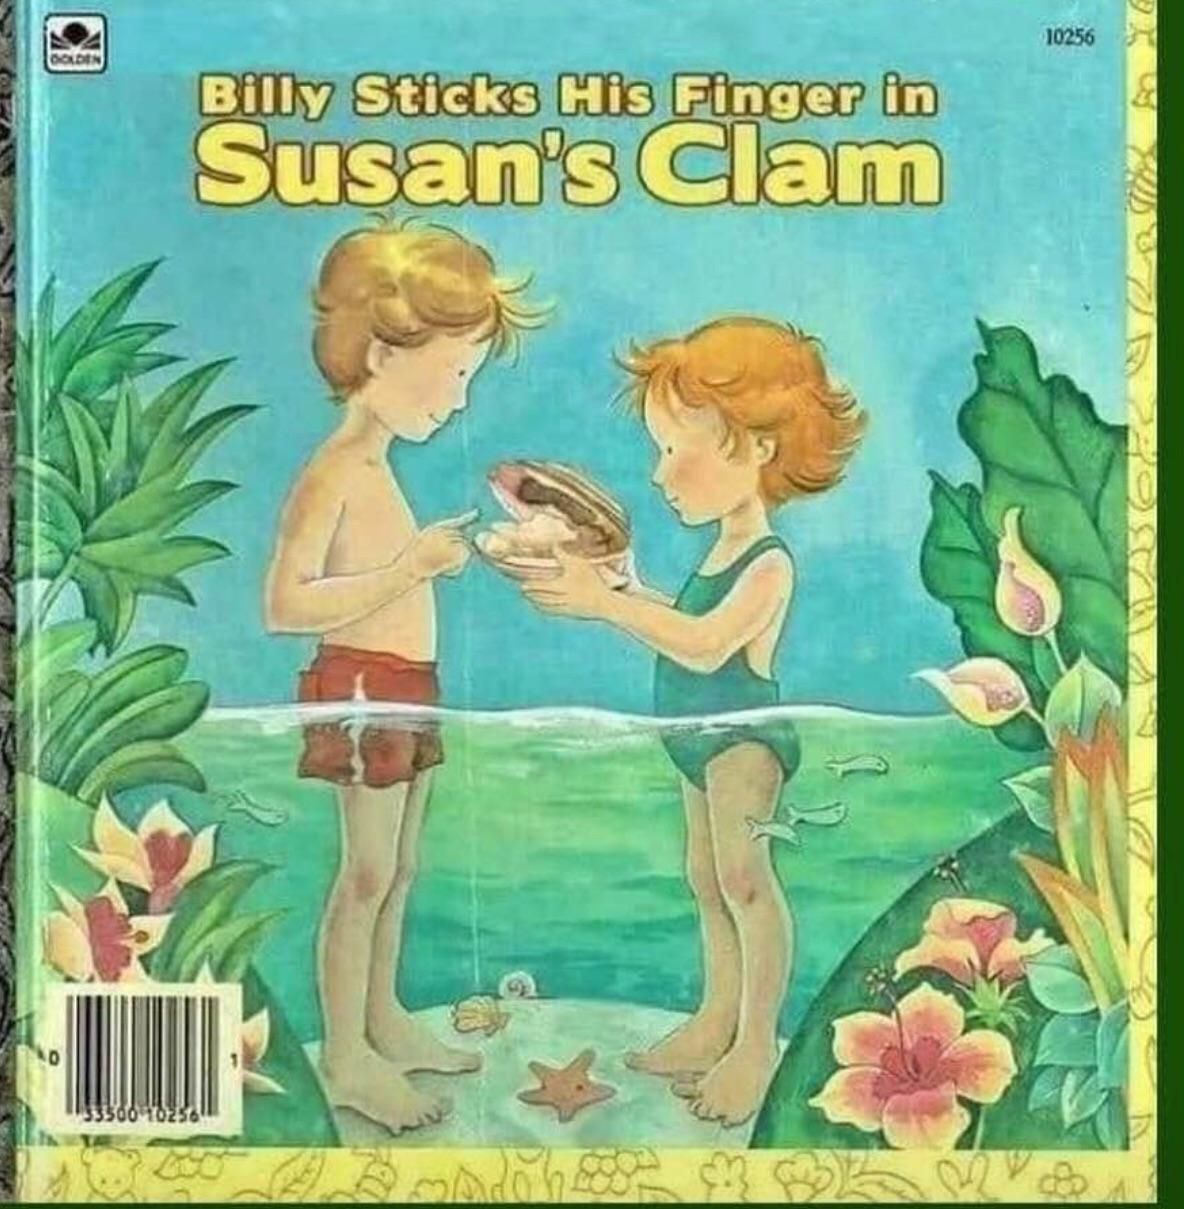 How come I don’t remember this book!